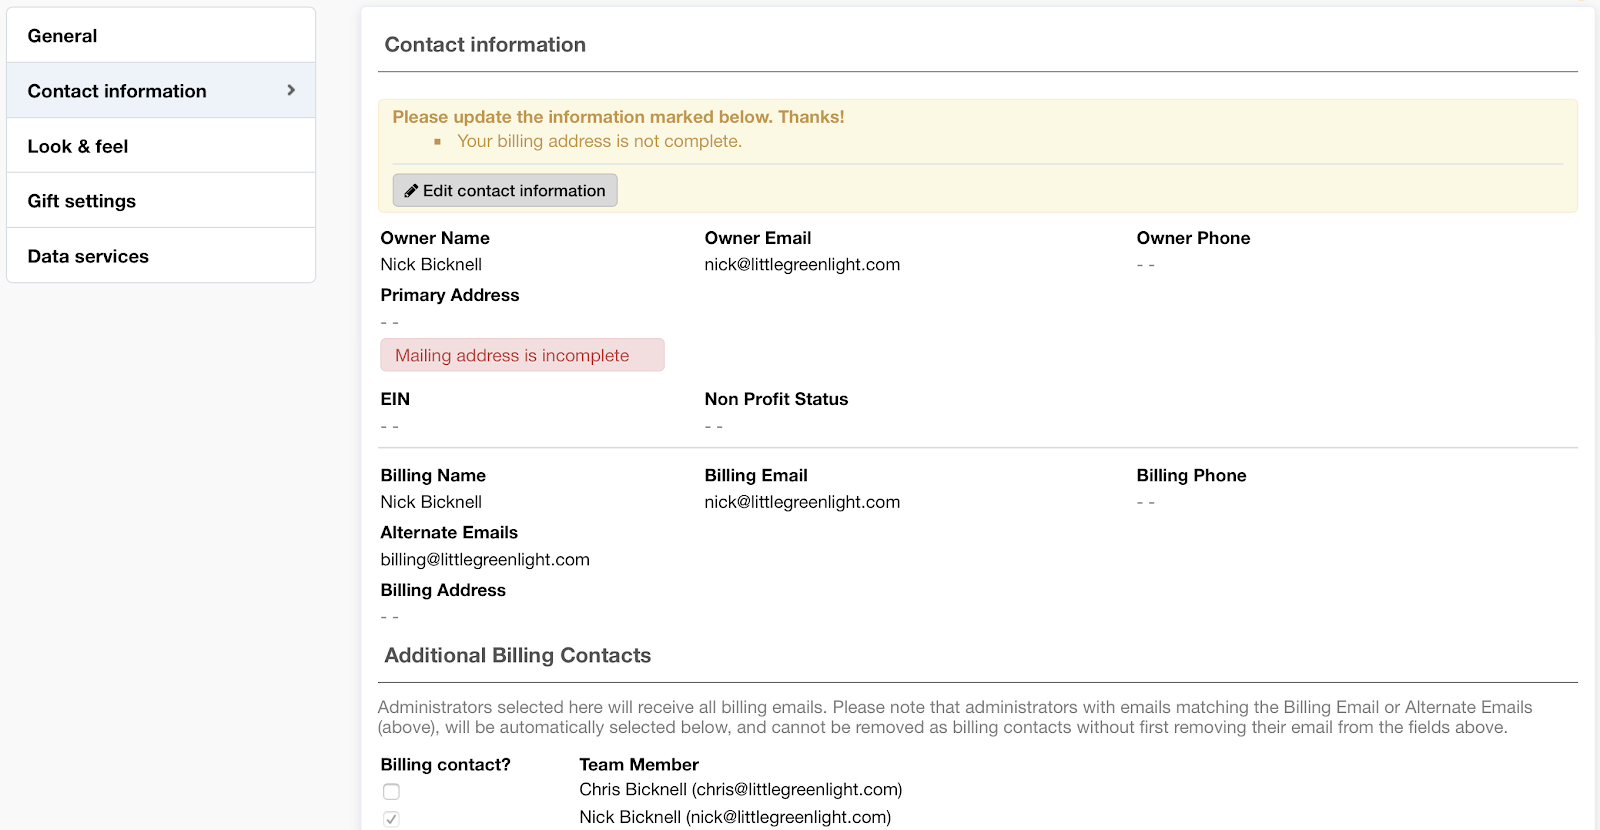 Only admins can be billing contacts